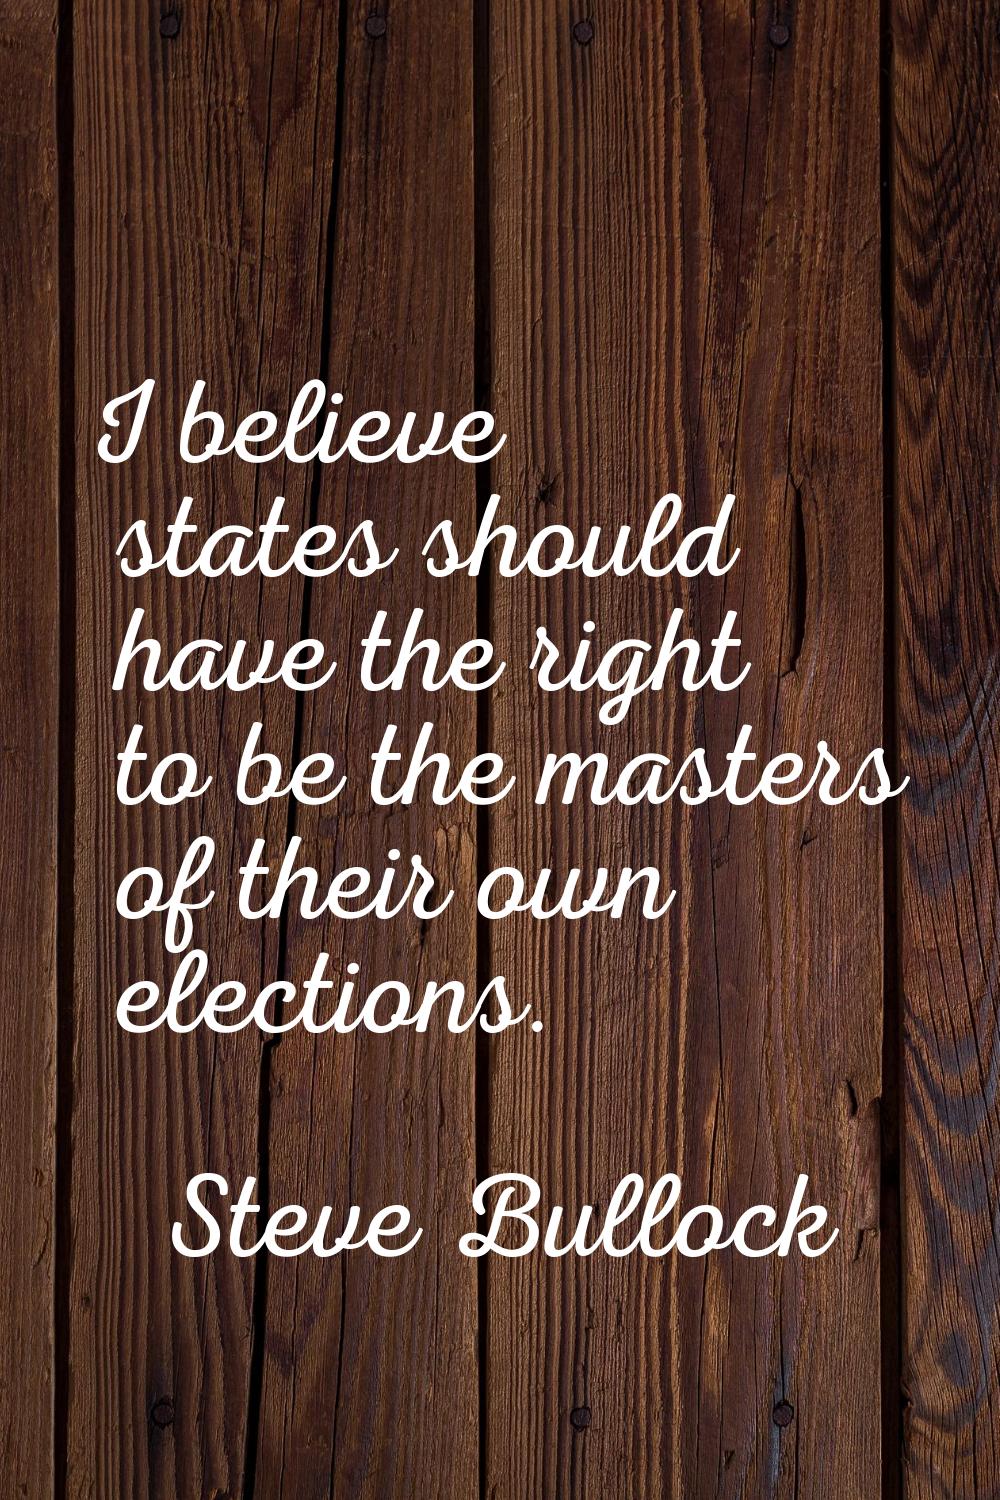 I believe states should have the right to be the masters of their own elections.